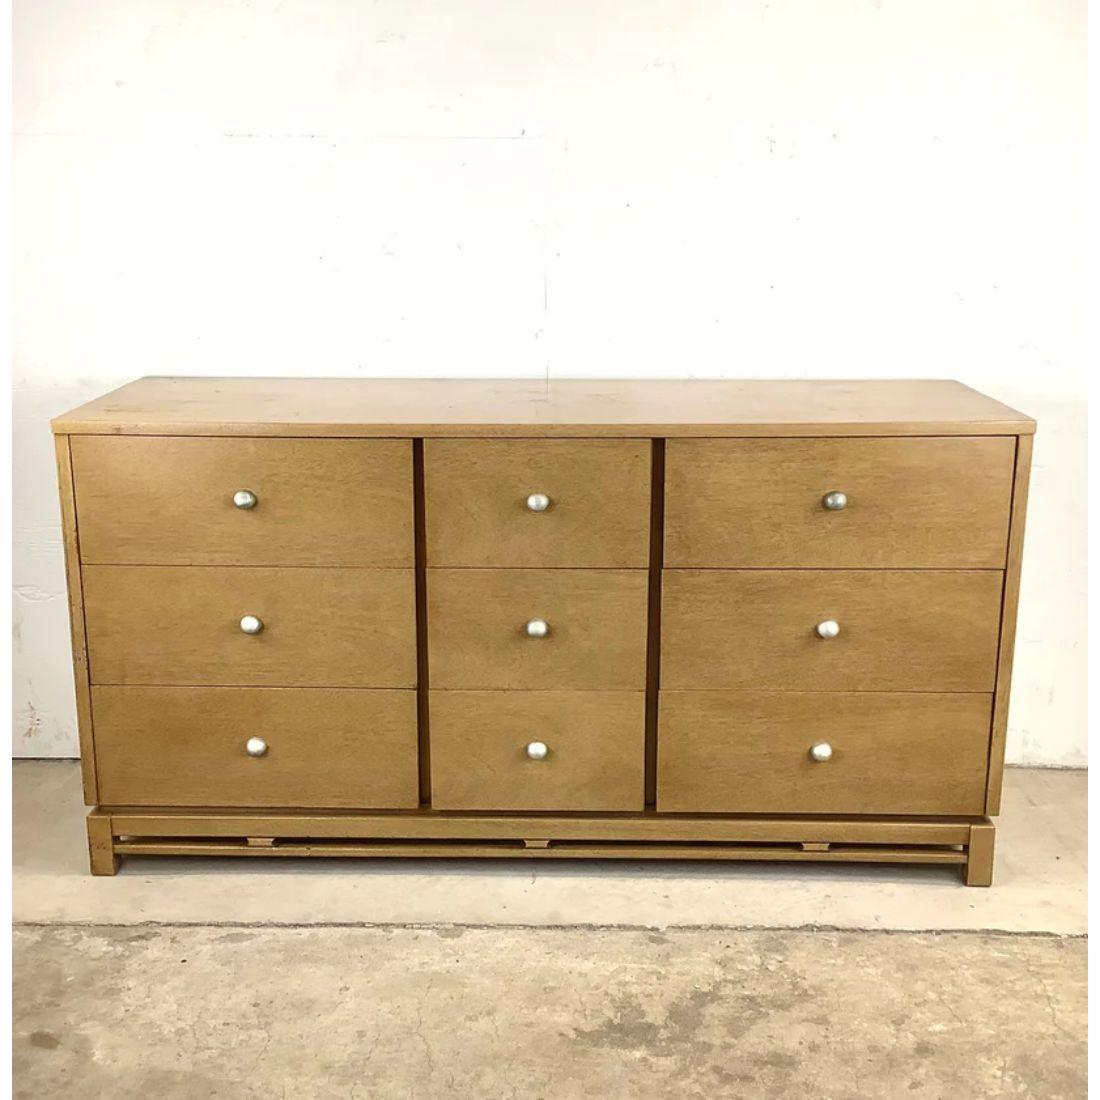 Enhance your living space with the timeless sophistication of this midcentury Simplex Dresser by Kent Coffey with Mirror. Crafted with the utmost care and attention to detail, this midcentury dresser embodies a perfect blend of style and